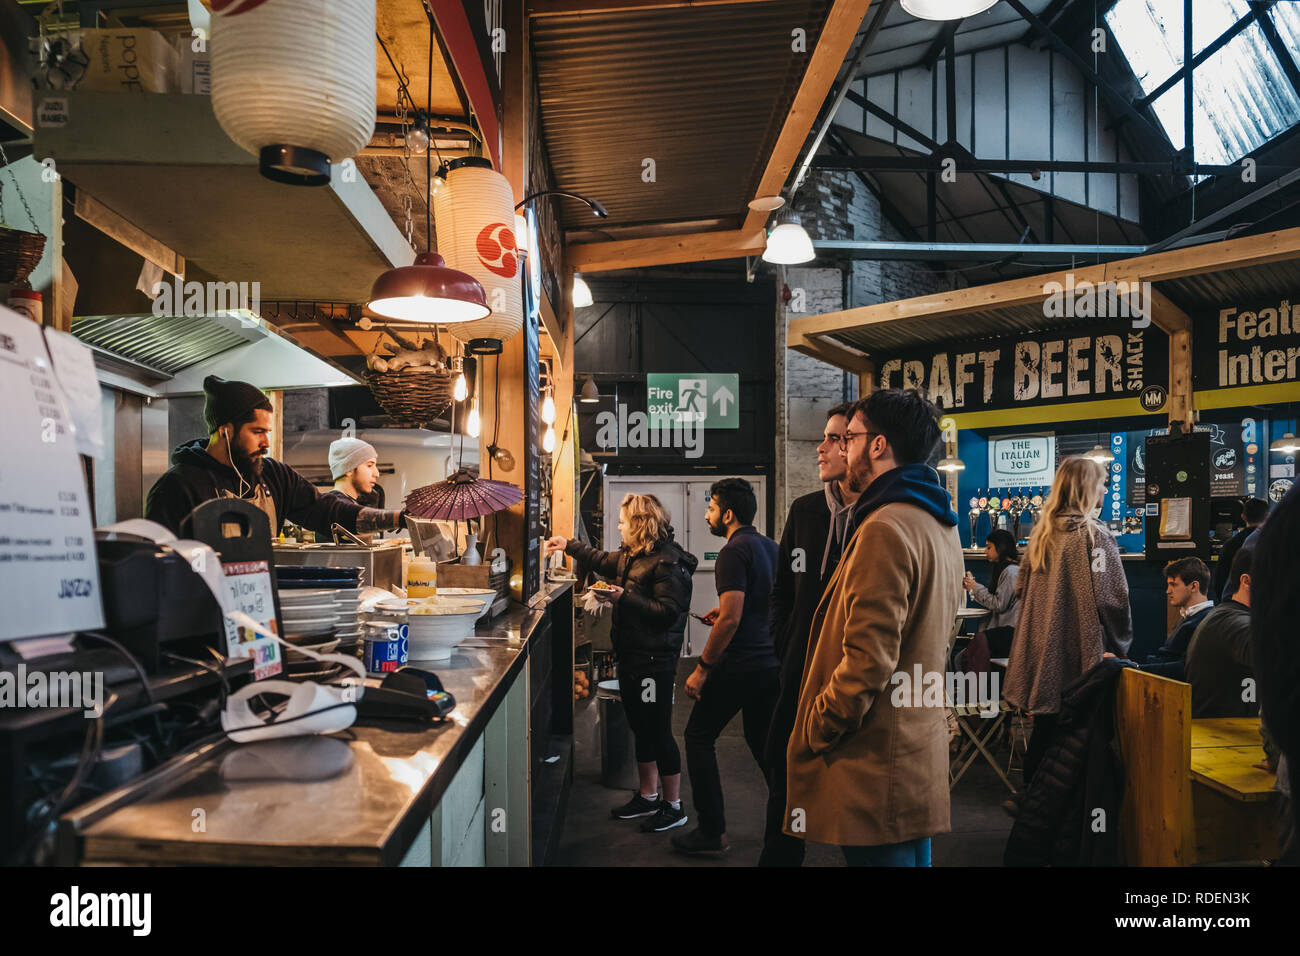 London, UK - January 13, 2019: People at Hermanos Taco House stand in Mercato Metropolitano, sustainable community market in London focused on revital Stock Photo